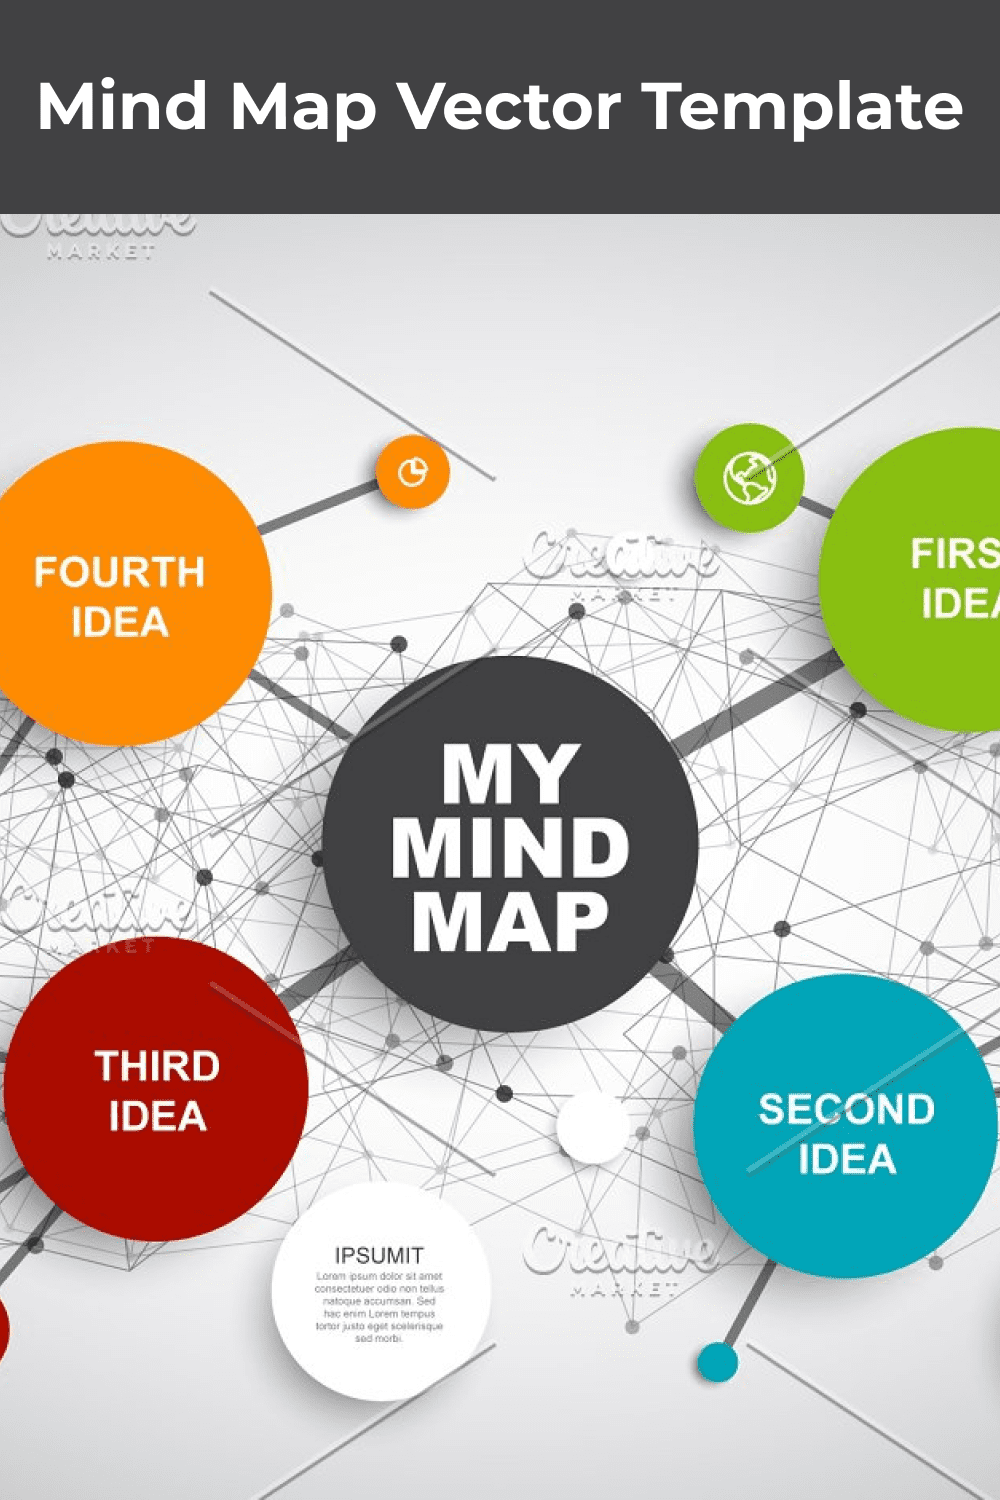 2 Mind Map Vector Template 